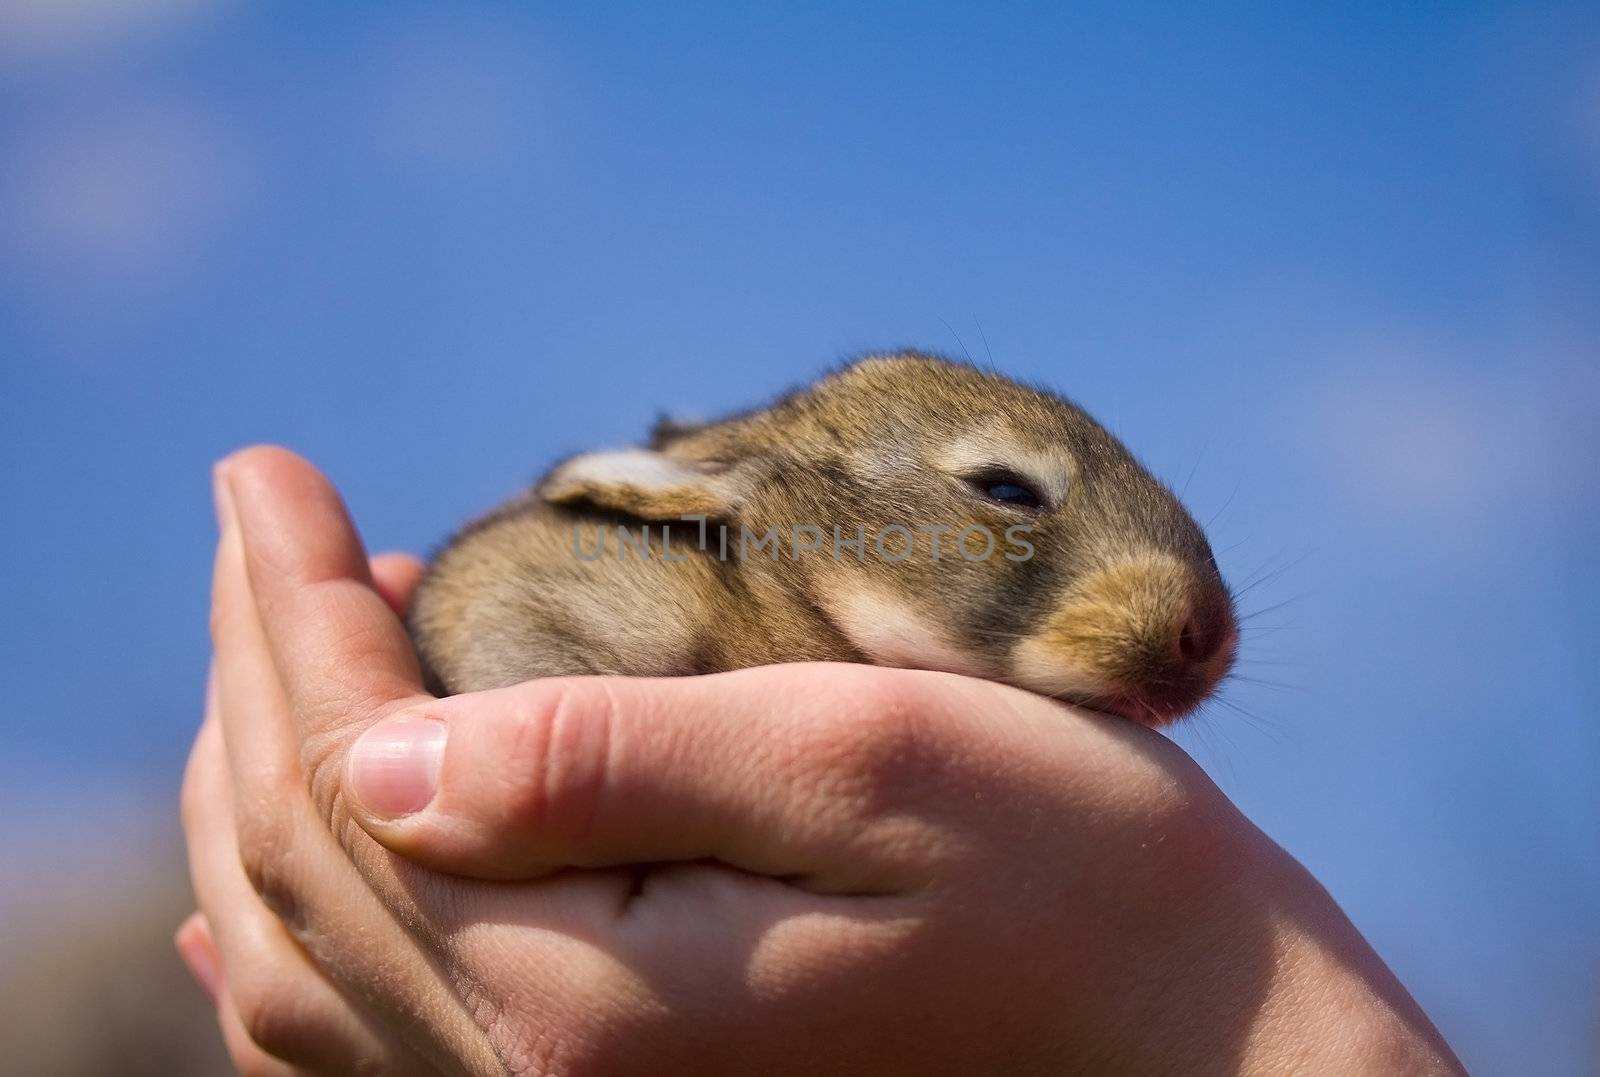 gray bunny in hand against blue sky background